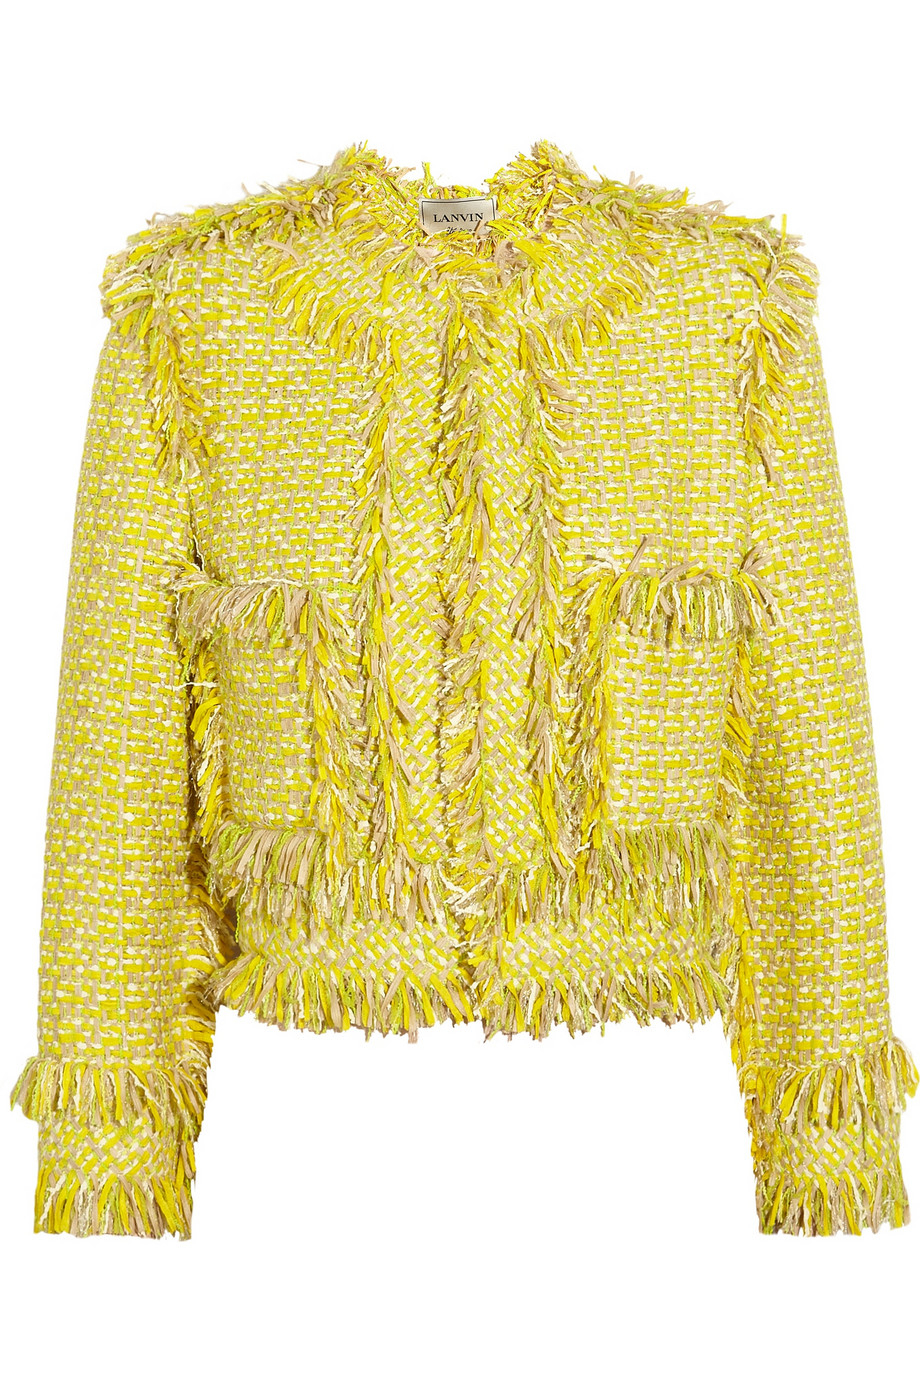 Lyst - Lanvin Frayed Tweed Jacket in Yellow